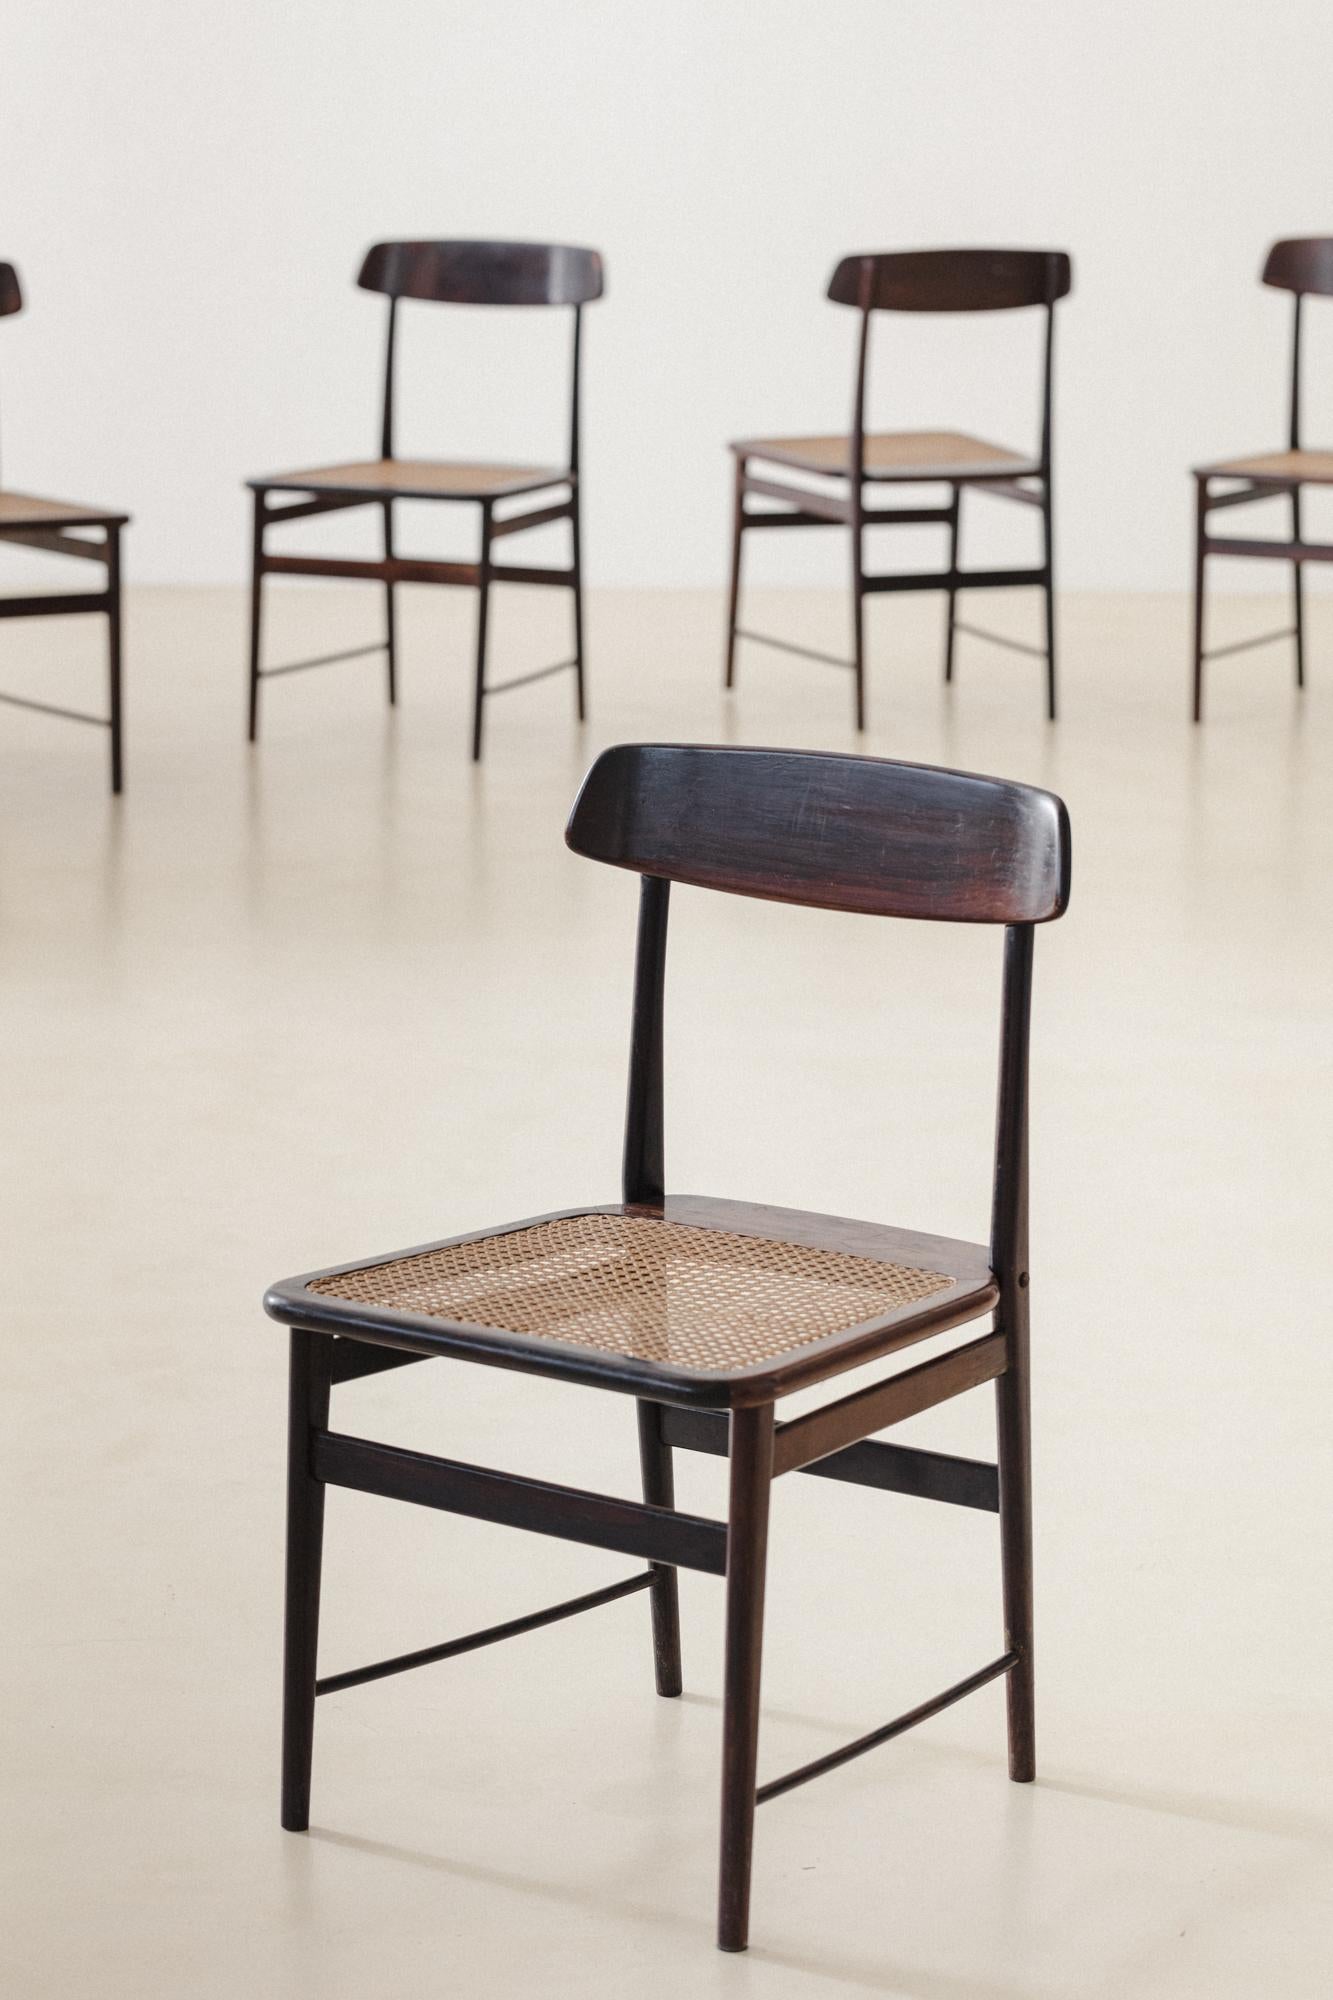 The Lucio chair is an icon of Brazilian design, made with a solid wood structure, originally rosewood, and a flat cane seat. The backrest is sculpted with anatomical design and turned feet. Sergio Rodrigues designed this piece in 1956 in honor of